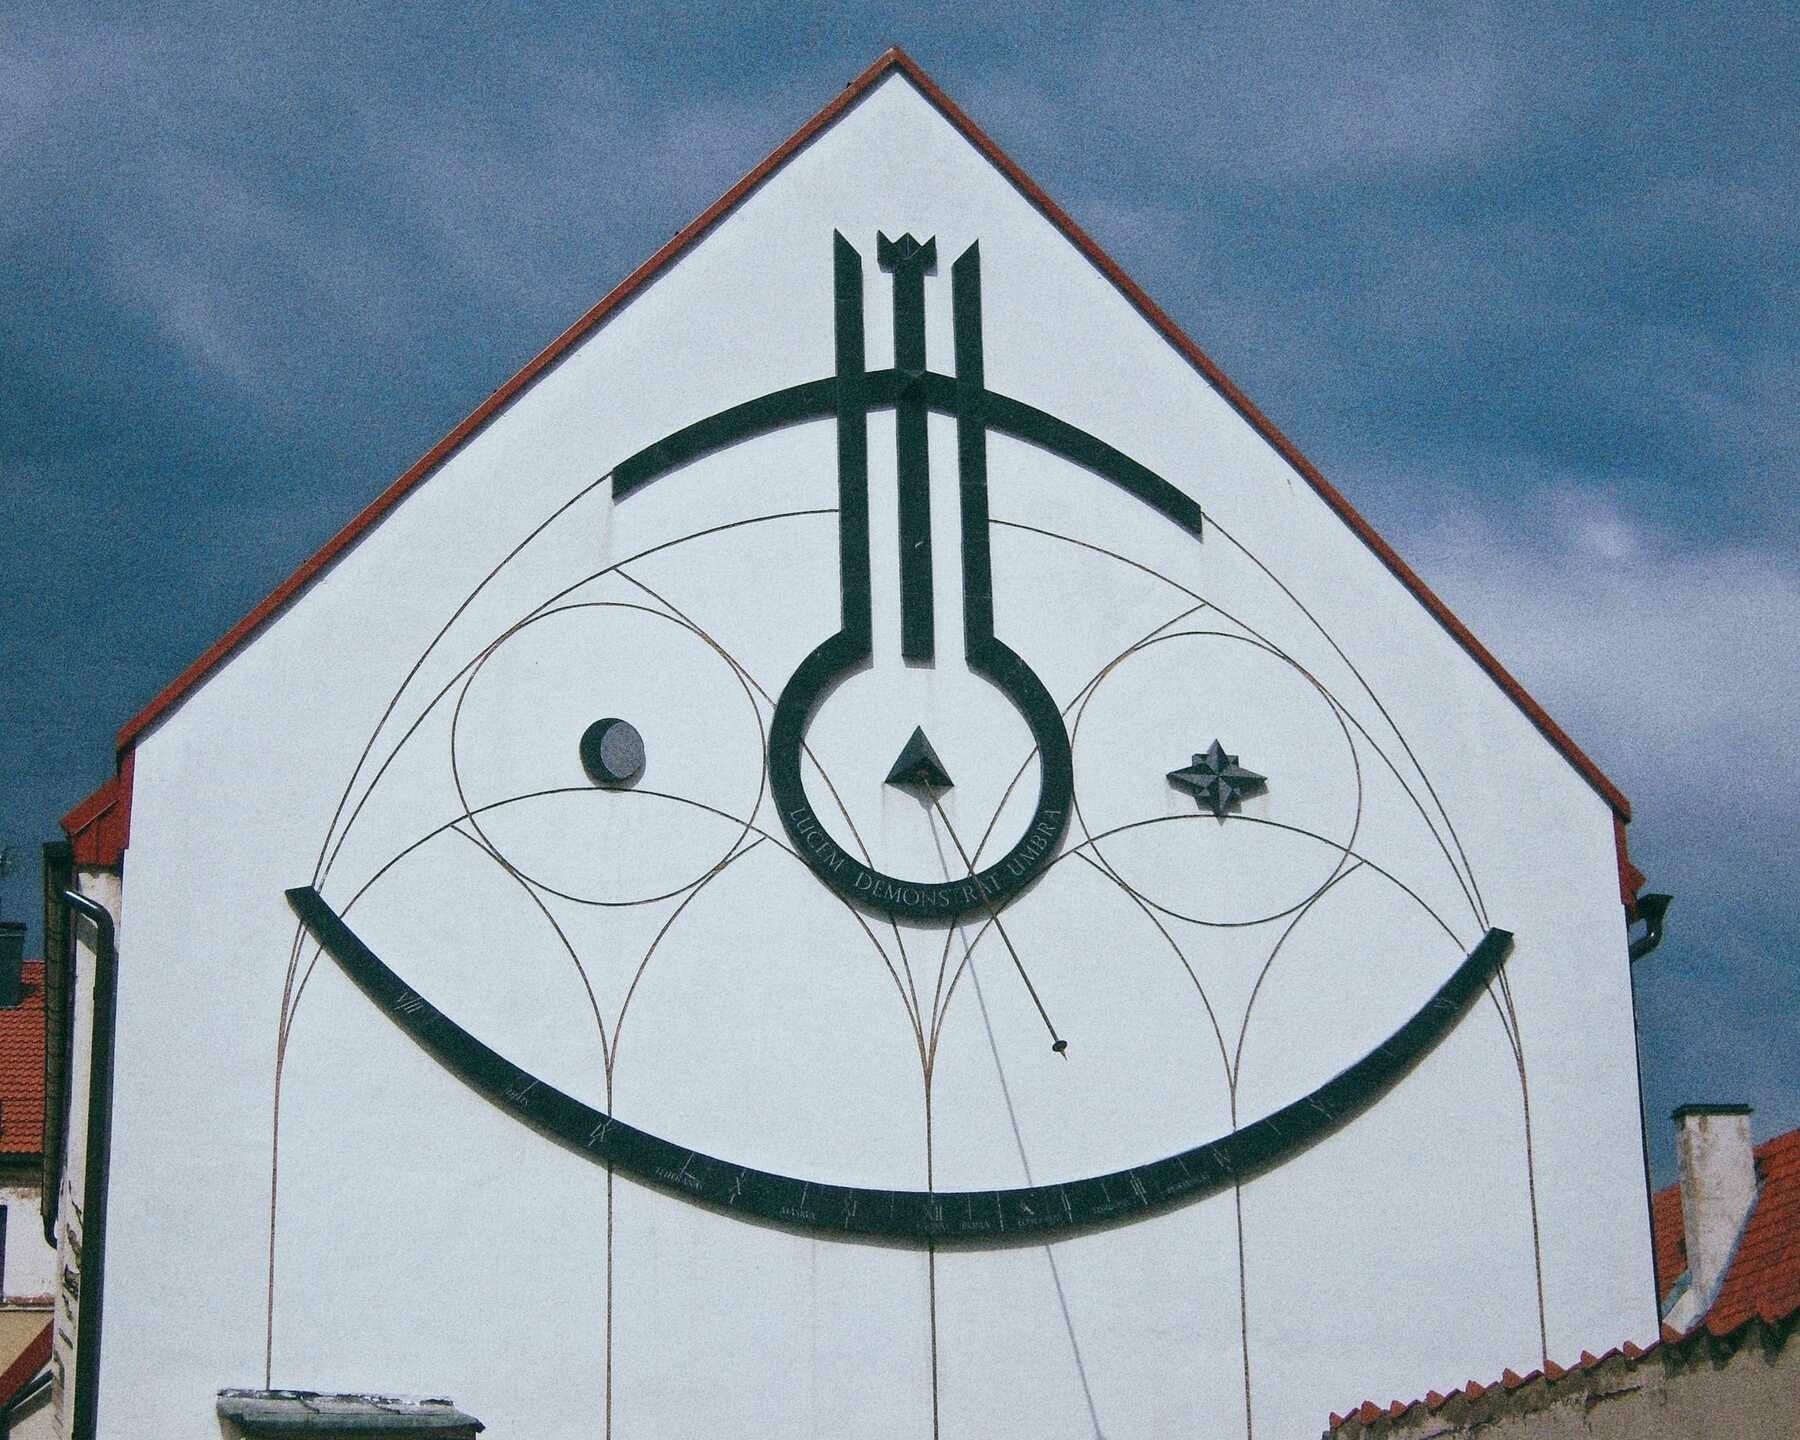 A large clock shaped to look like a face in Kaunus, Lithuania.